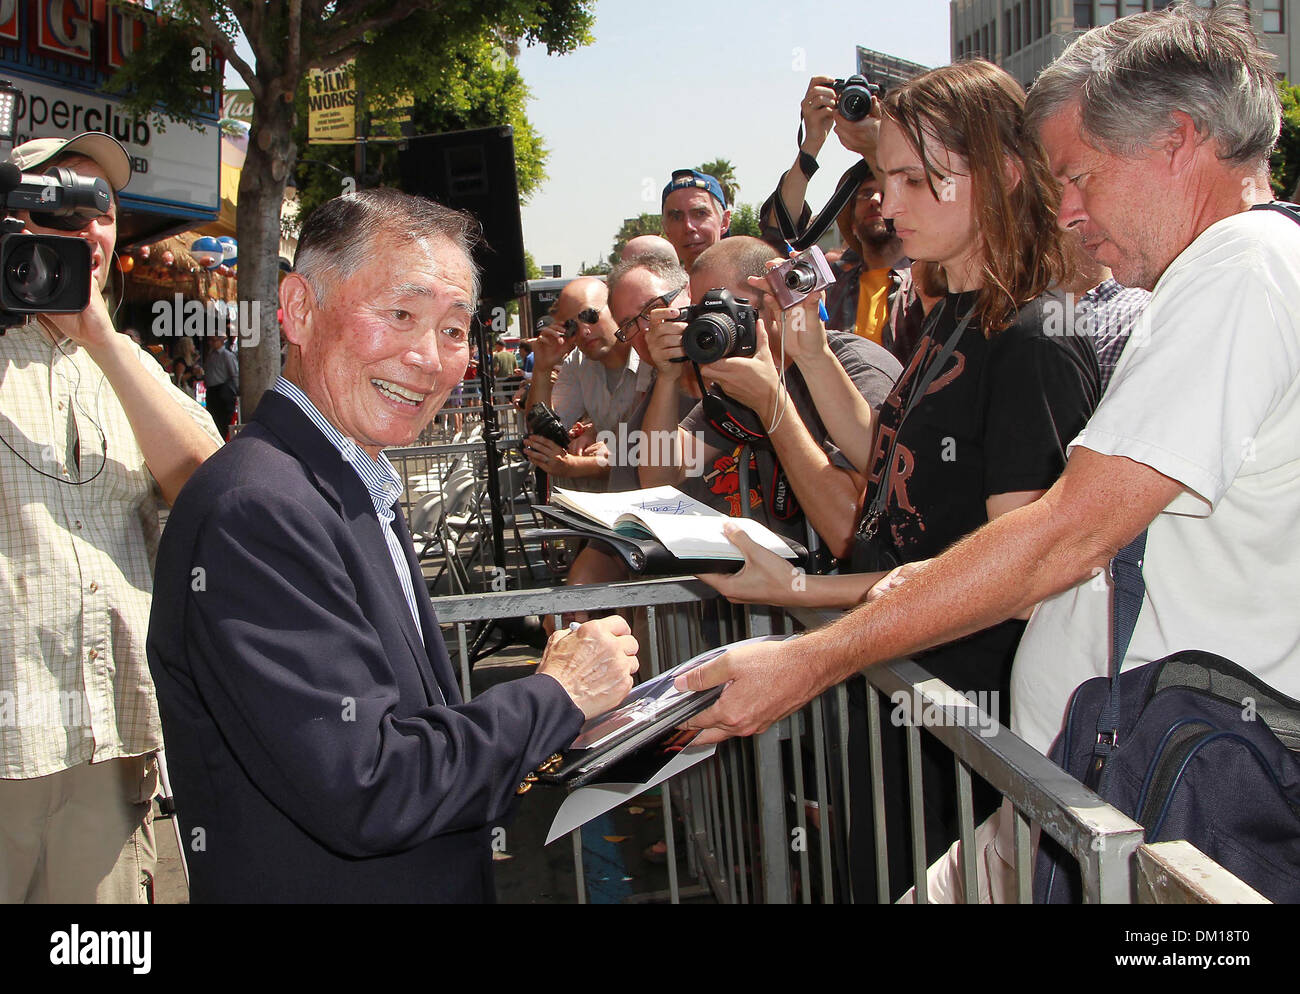 George Takei at Walter Koenig honor with a Star on Hollywood Walk of Fame Hollywood California - 10.09.12 Stock Photo